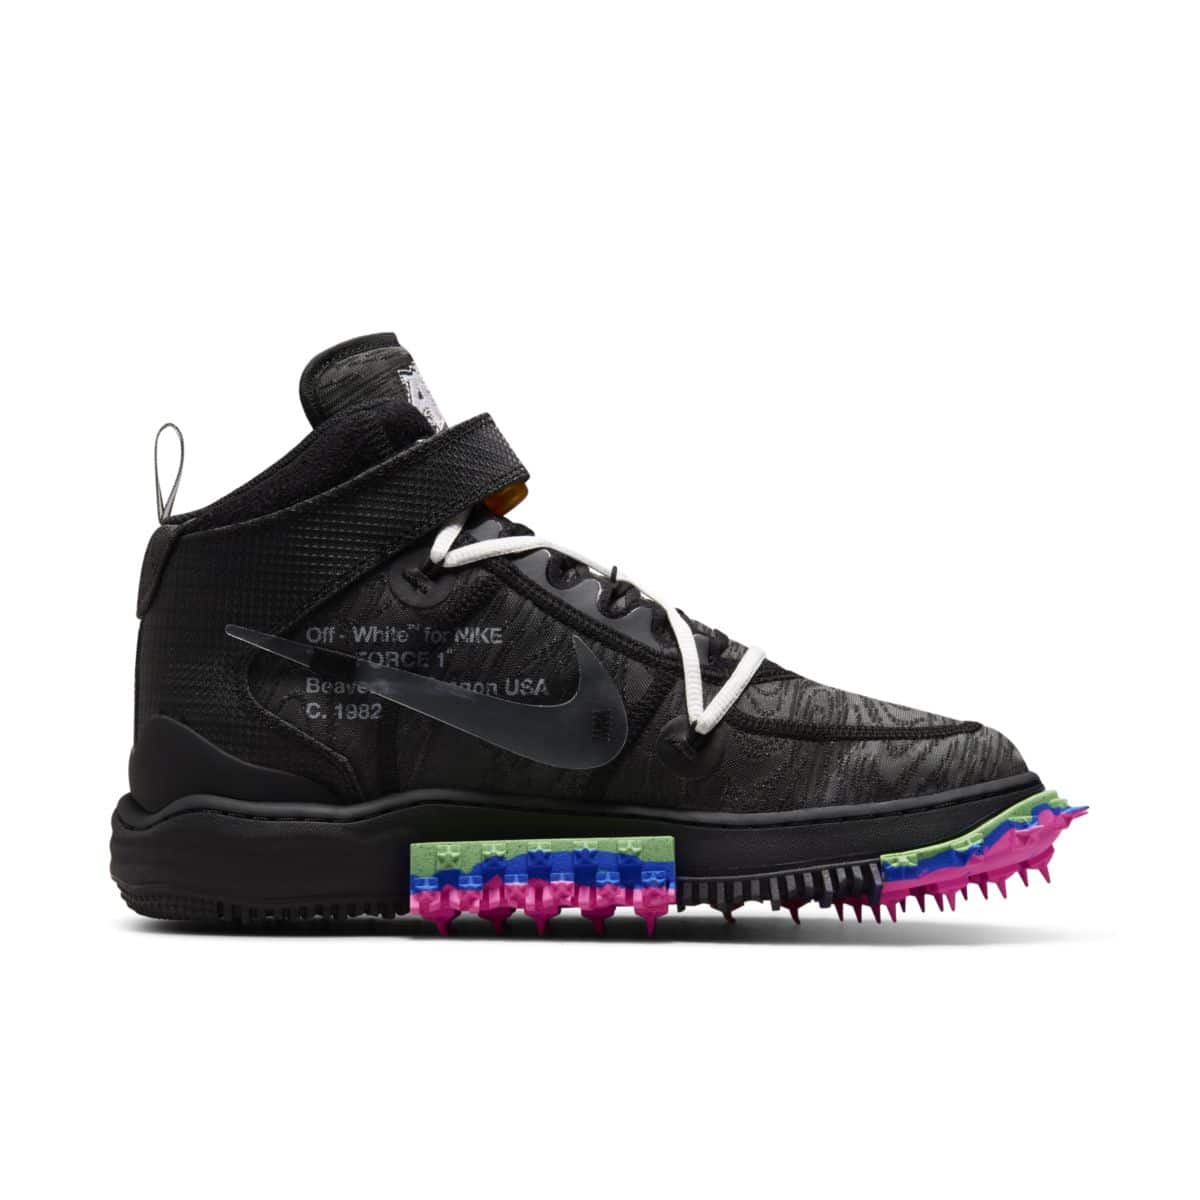 Off-White x Nike Air Force 1 Mid Black DO6290-001 3